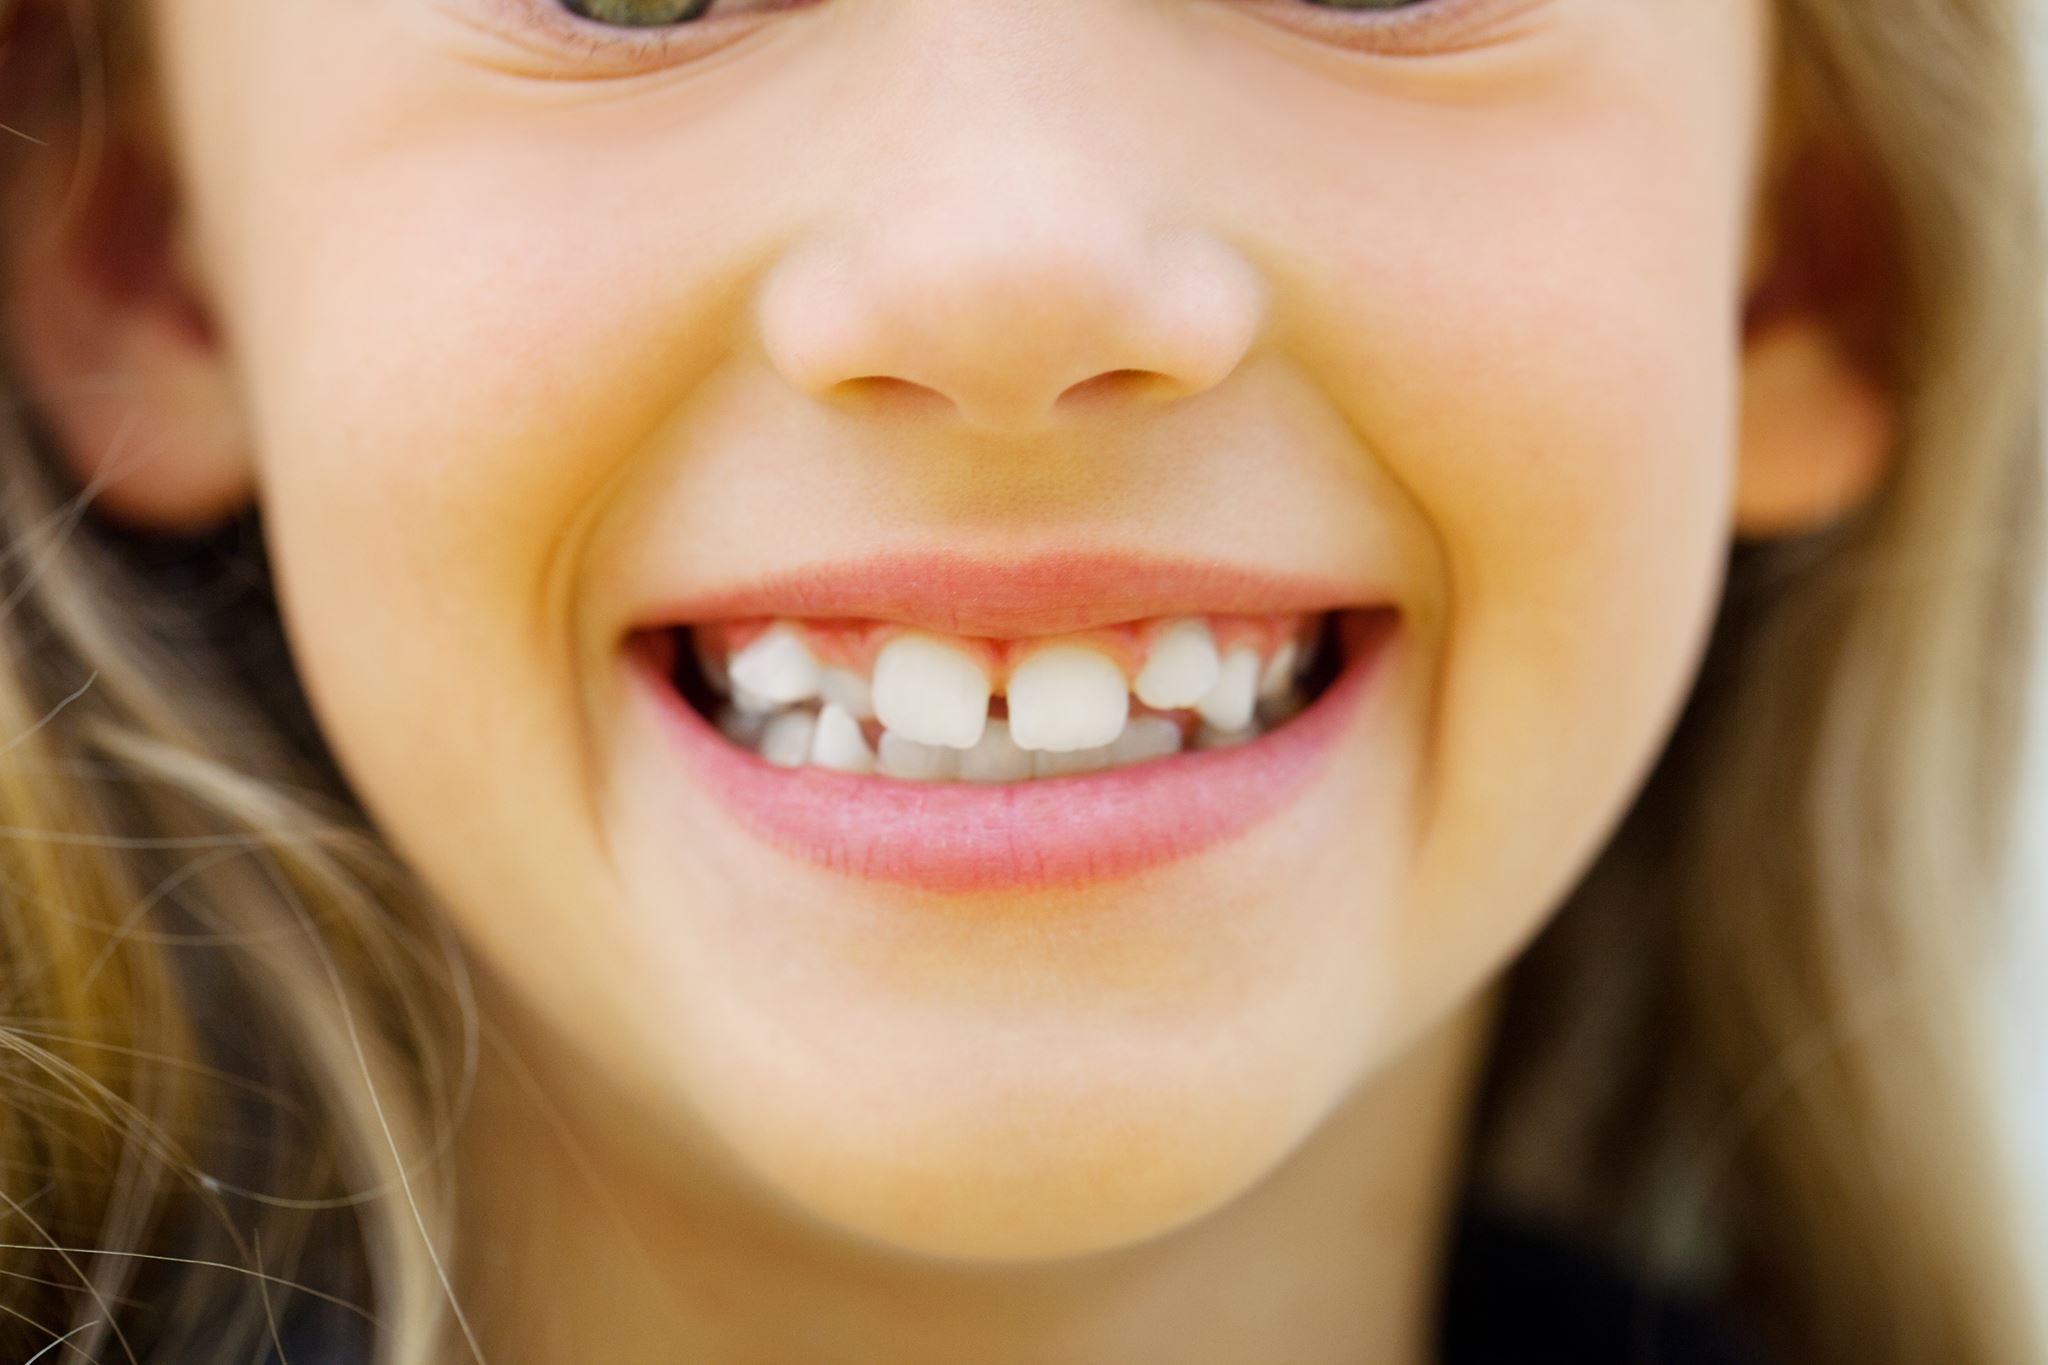 Why Do We Get Crooked Teeth?